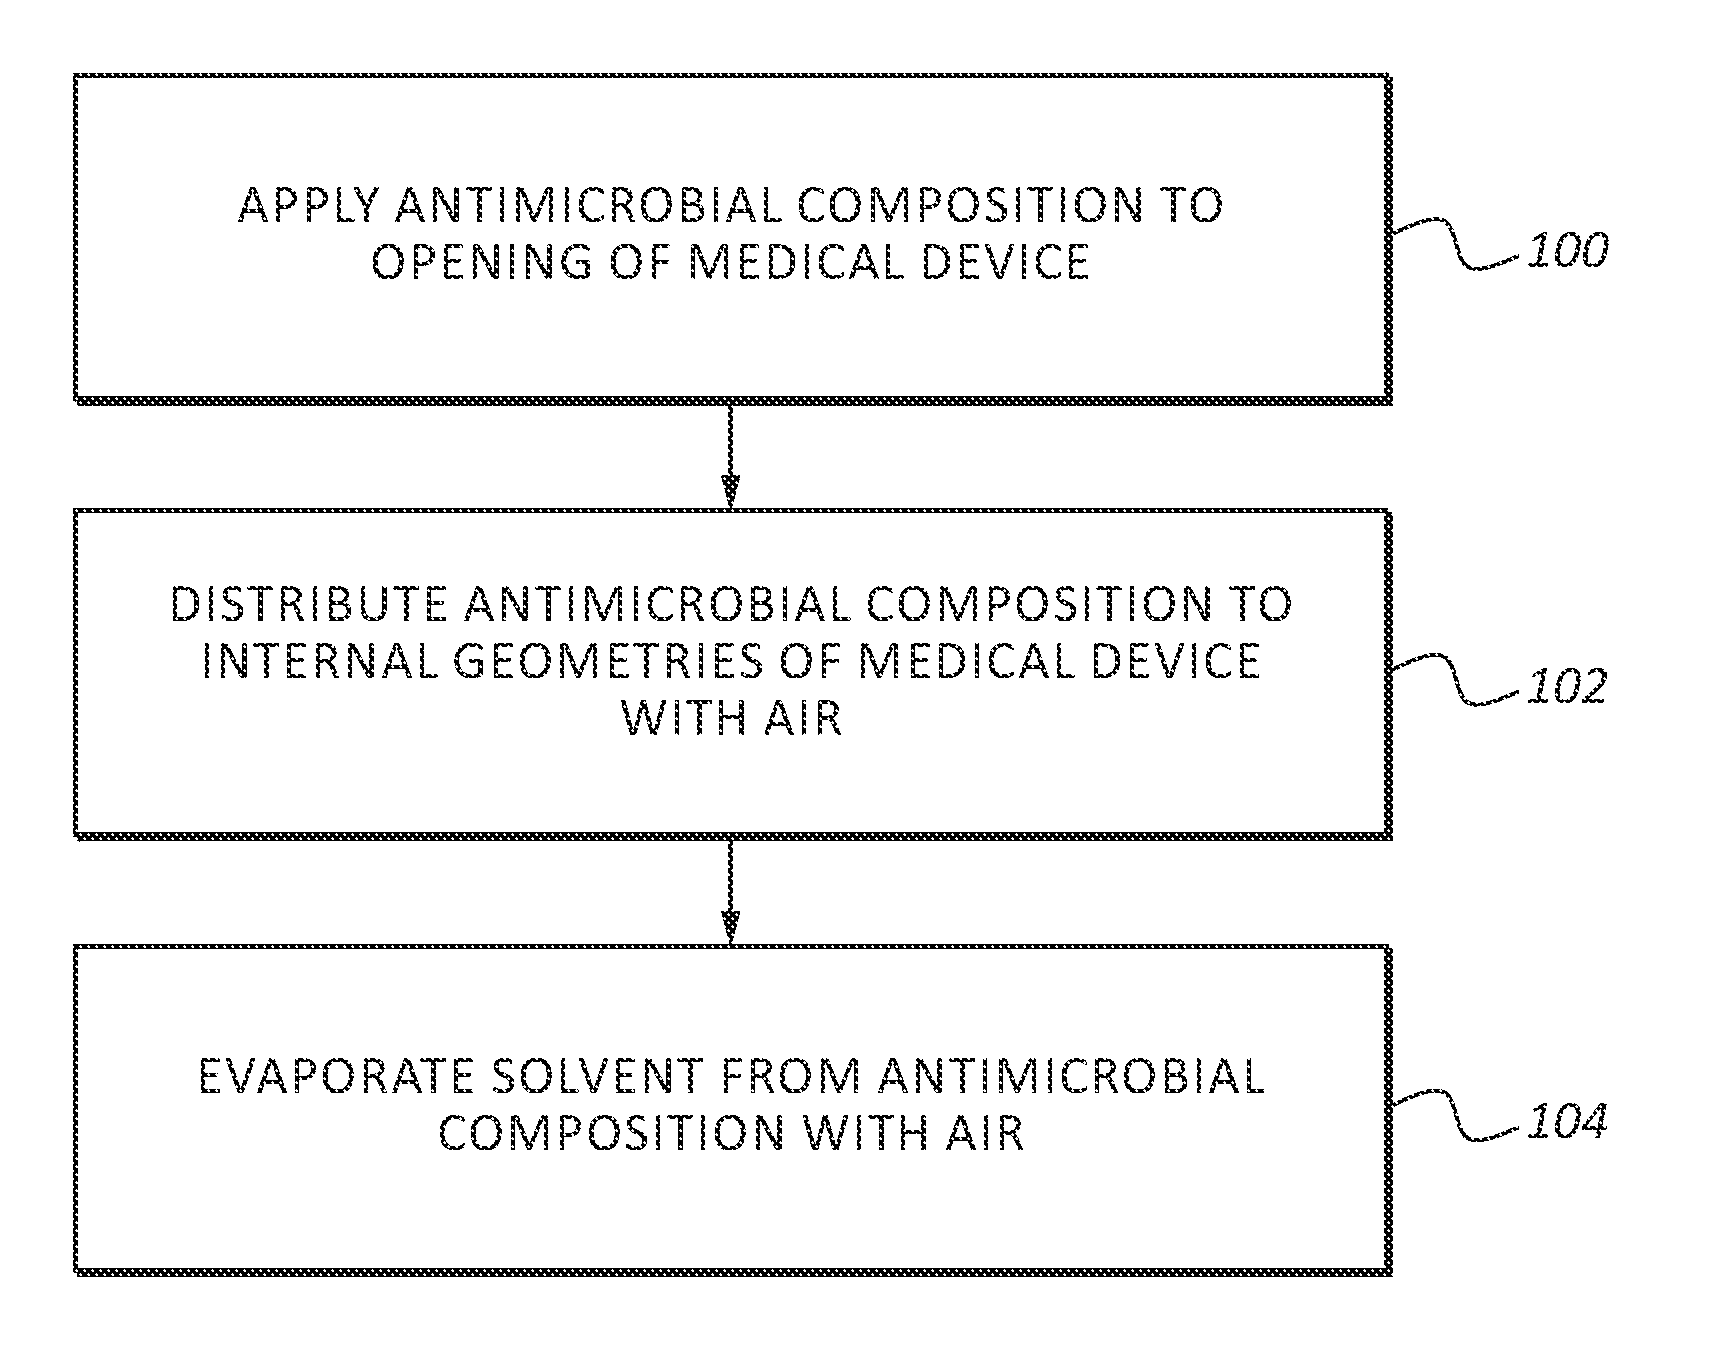 Systems and methods for applying a novel antimicrobial coating material to a medical device